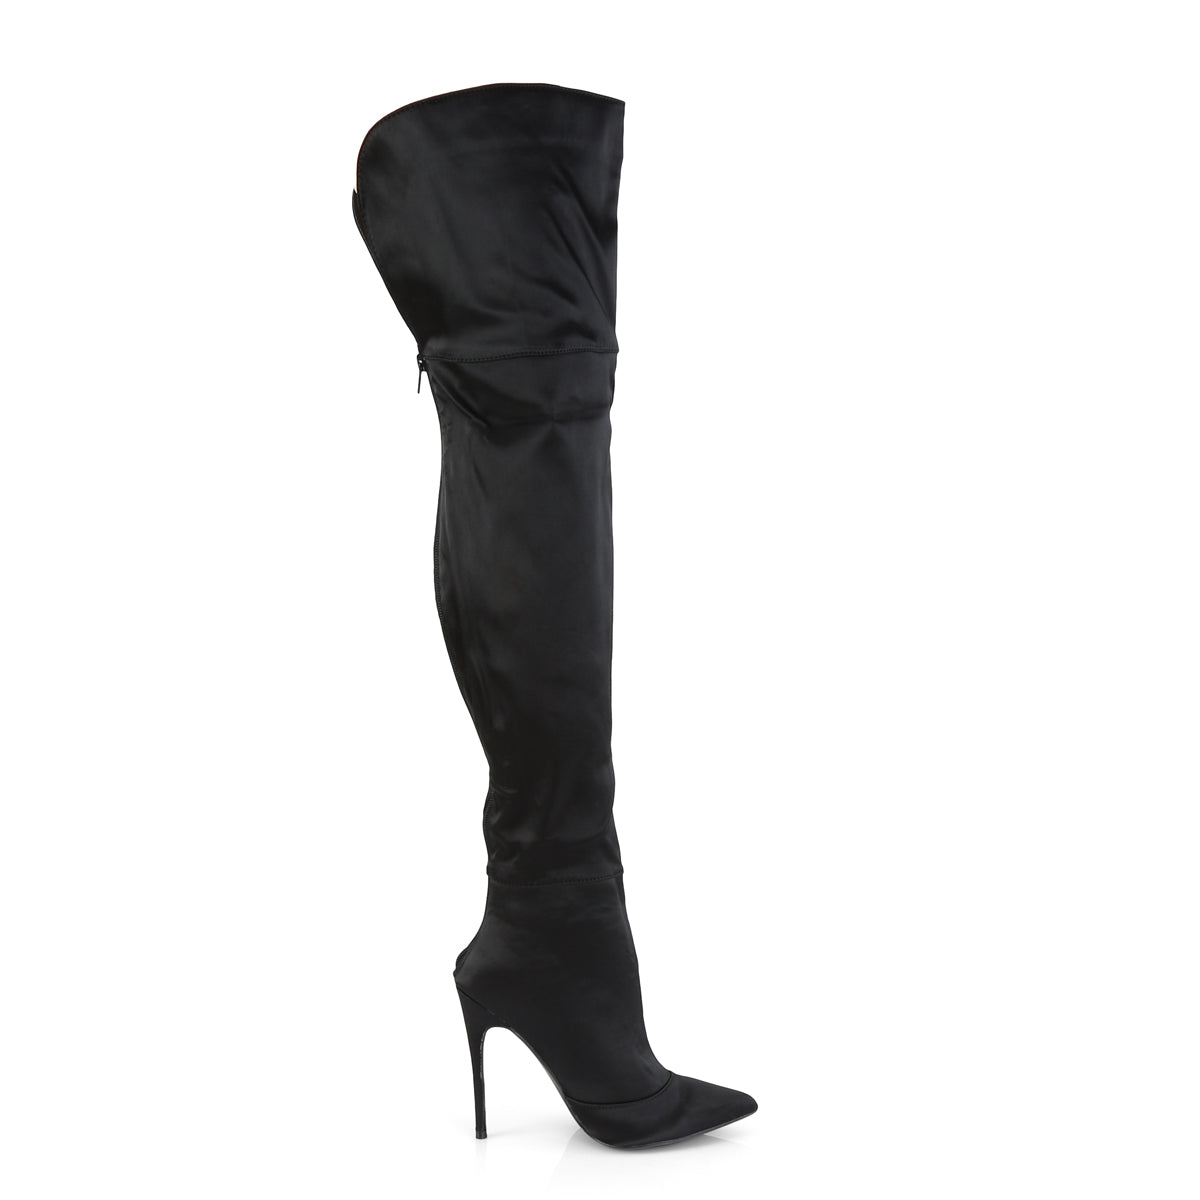 Pleaser Womens Boots. COURTLY-3012 BLK Stretch Satin